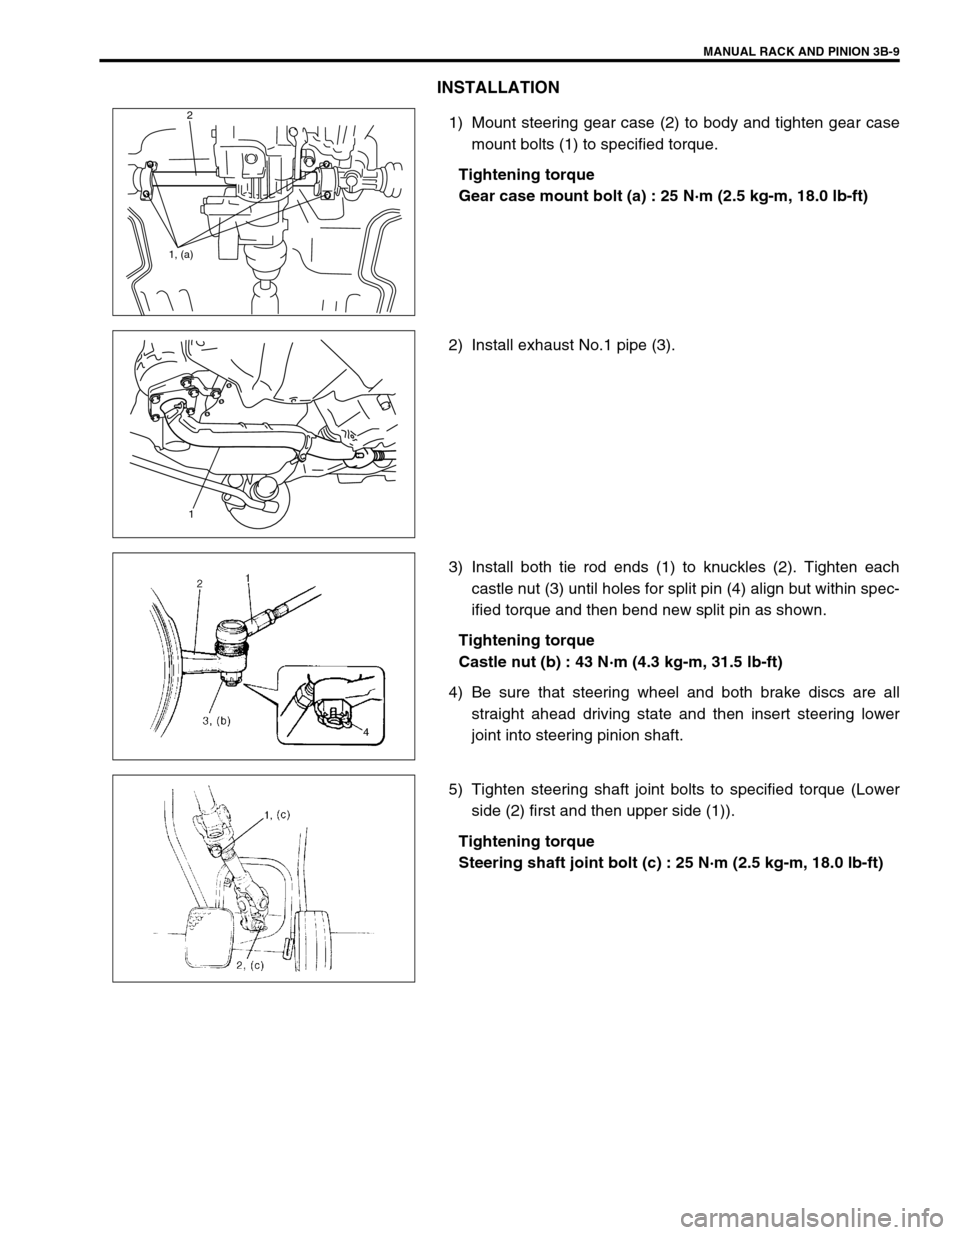 SUZUKI SWIFT 2000 1.G RG413 Service Workshop Manual MANUAL RACK AND PINION 3B-9
INSTALLATION
1) Mount steering gear case (2) to body and tighten gear case
mount bolts (1) to specified torque.
Tightening torque
Gear case mount bolt (a) : 25 N·m (2.5 kg